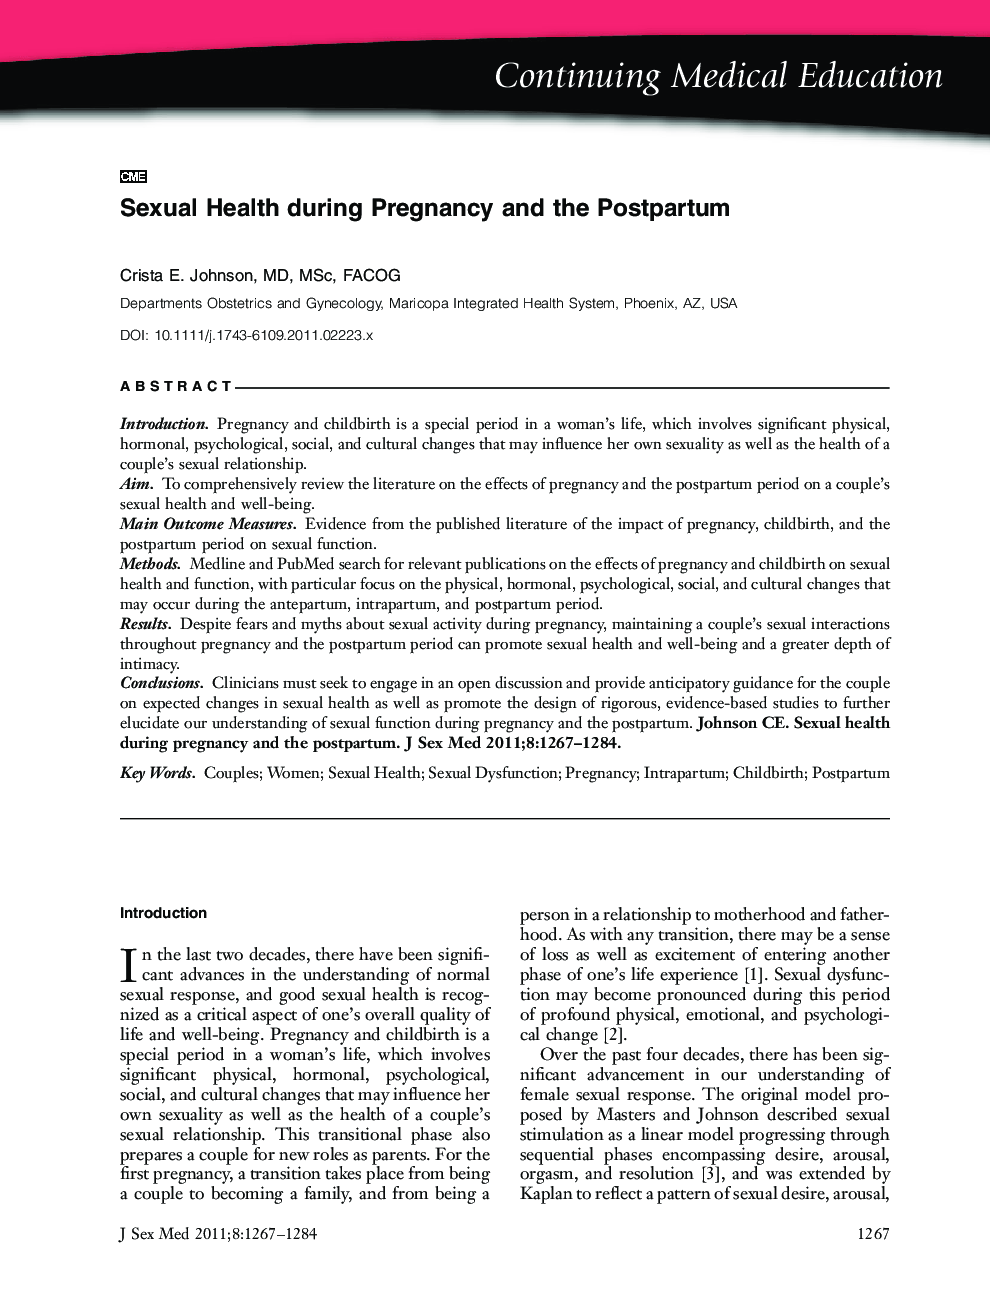 Sexual Health during Pregnancy and the Postpartum (CME)